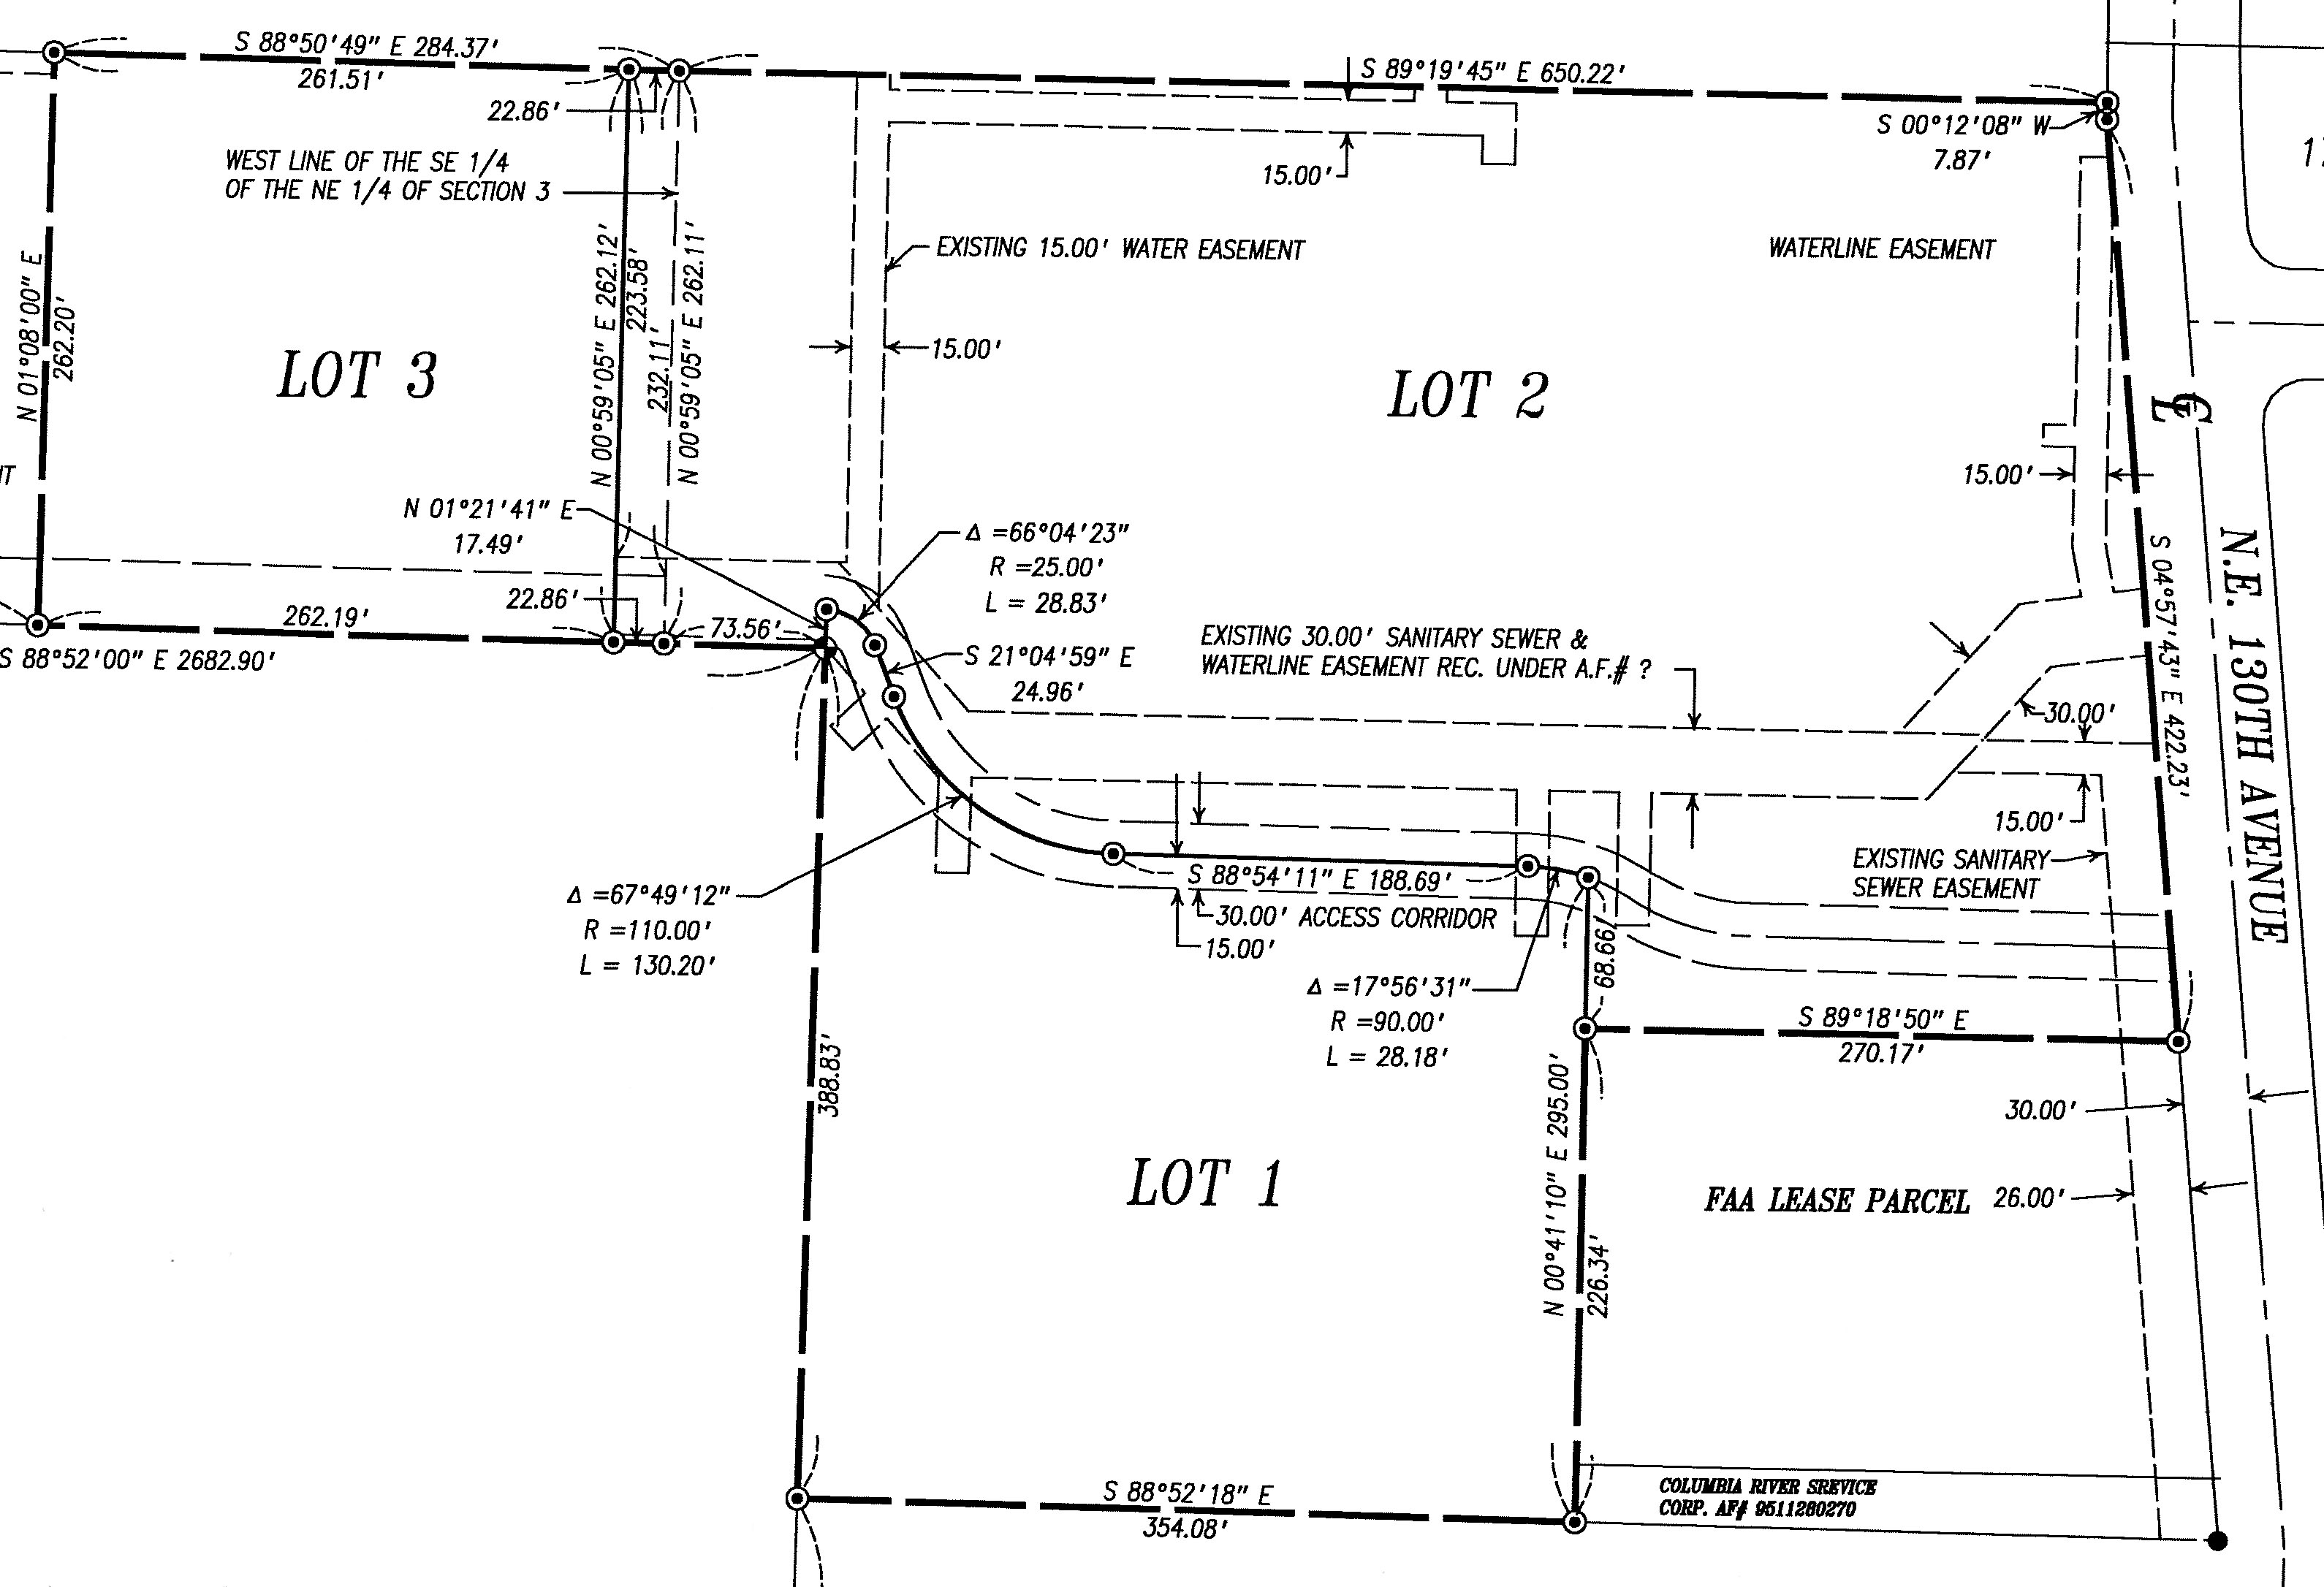 This is a small parcel map of the East parcel of Olin Business Park.